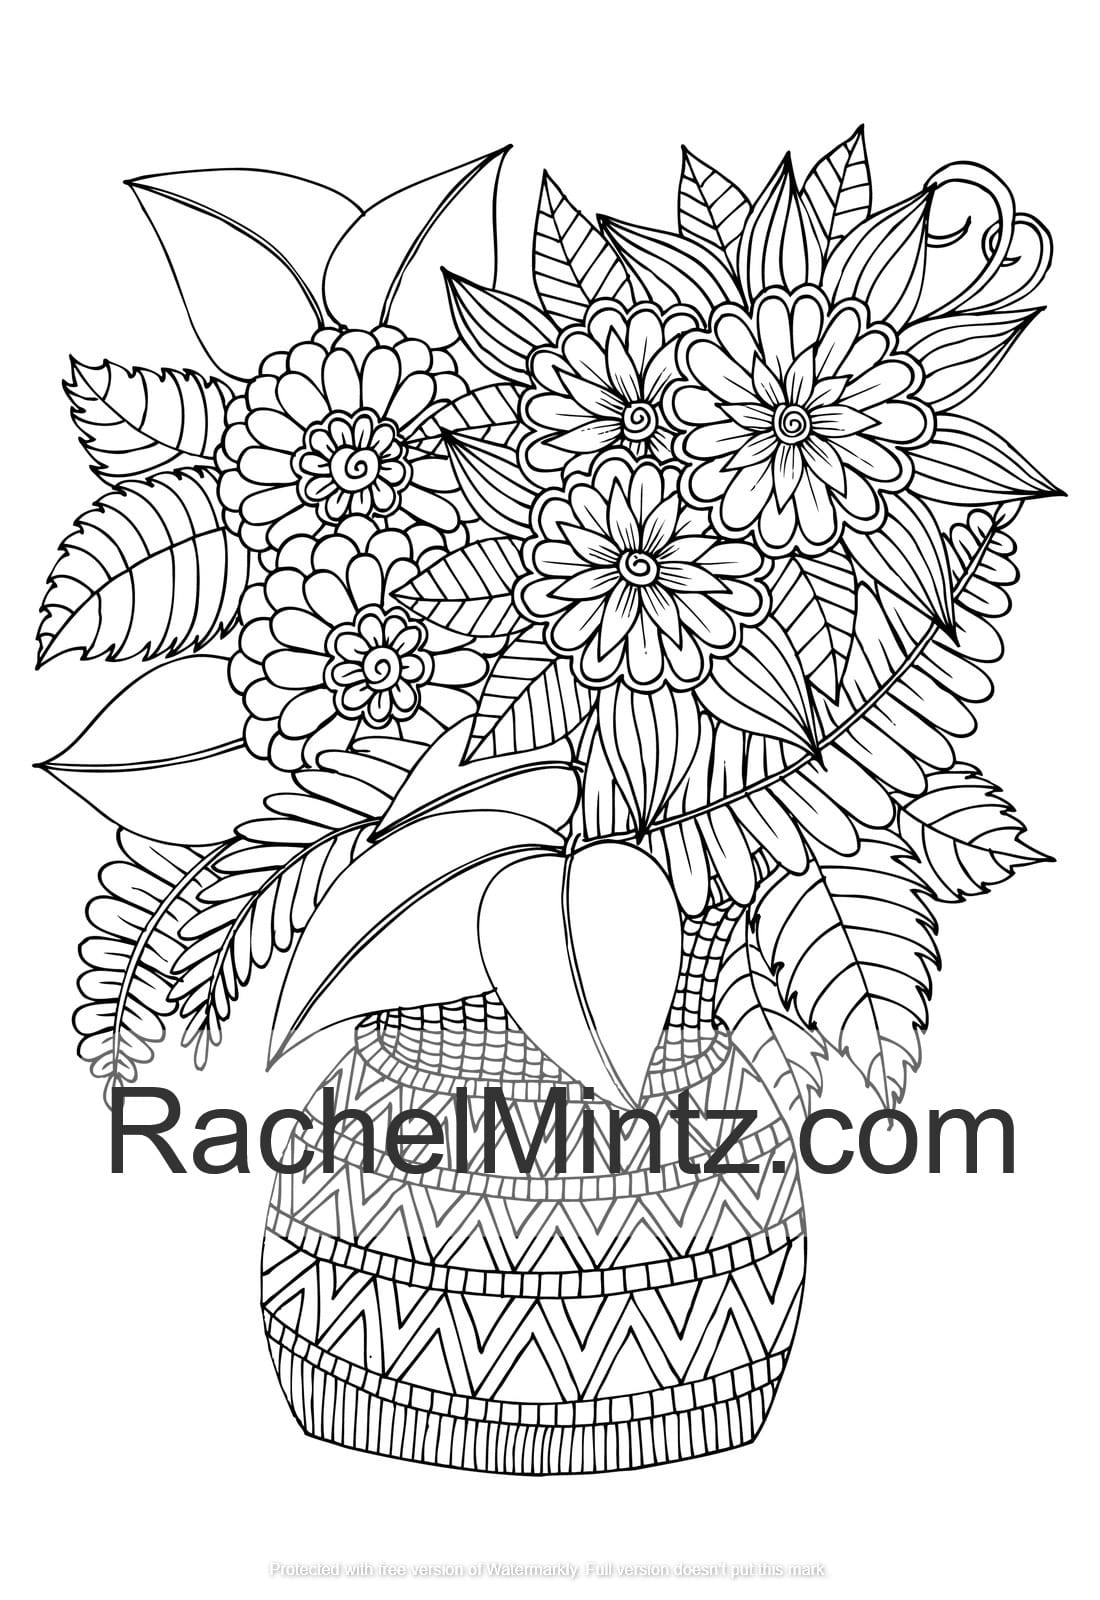 My flowers bouquet coloring book